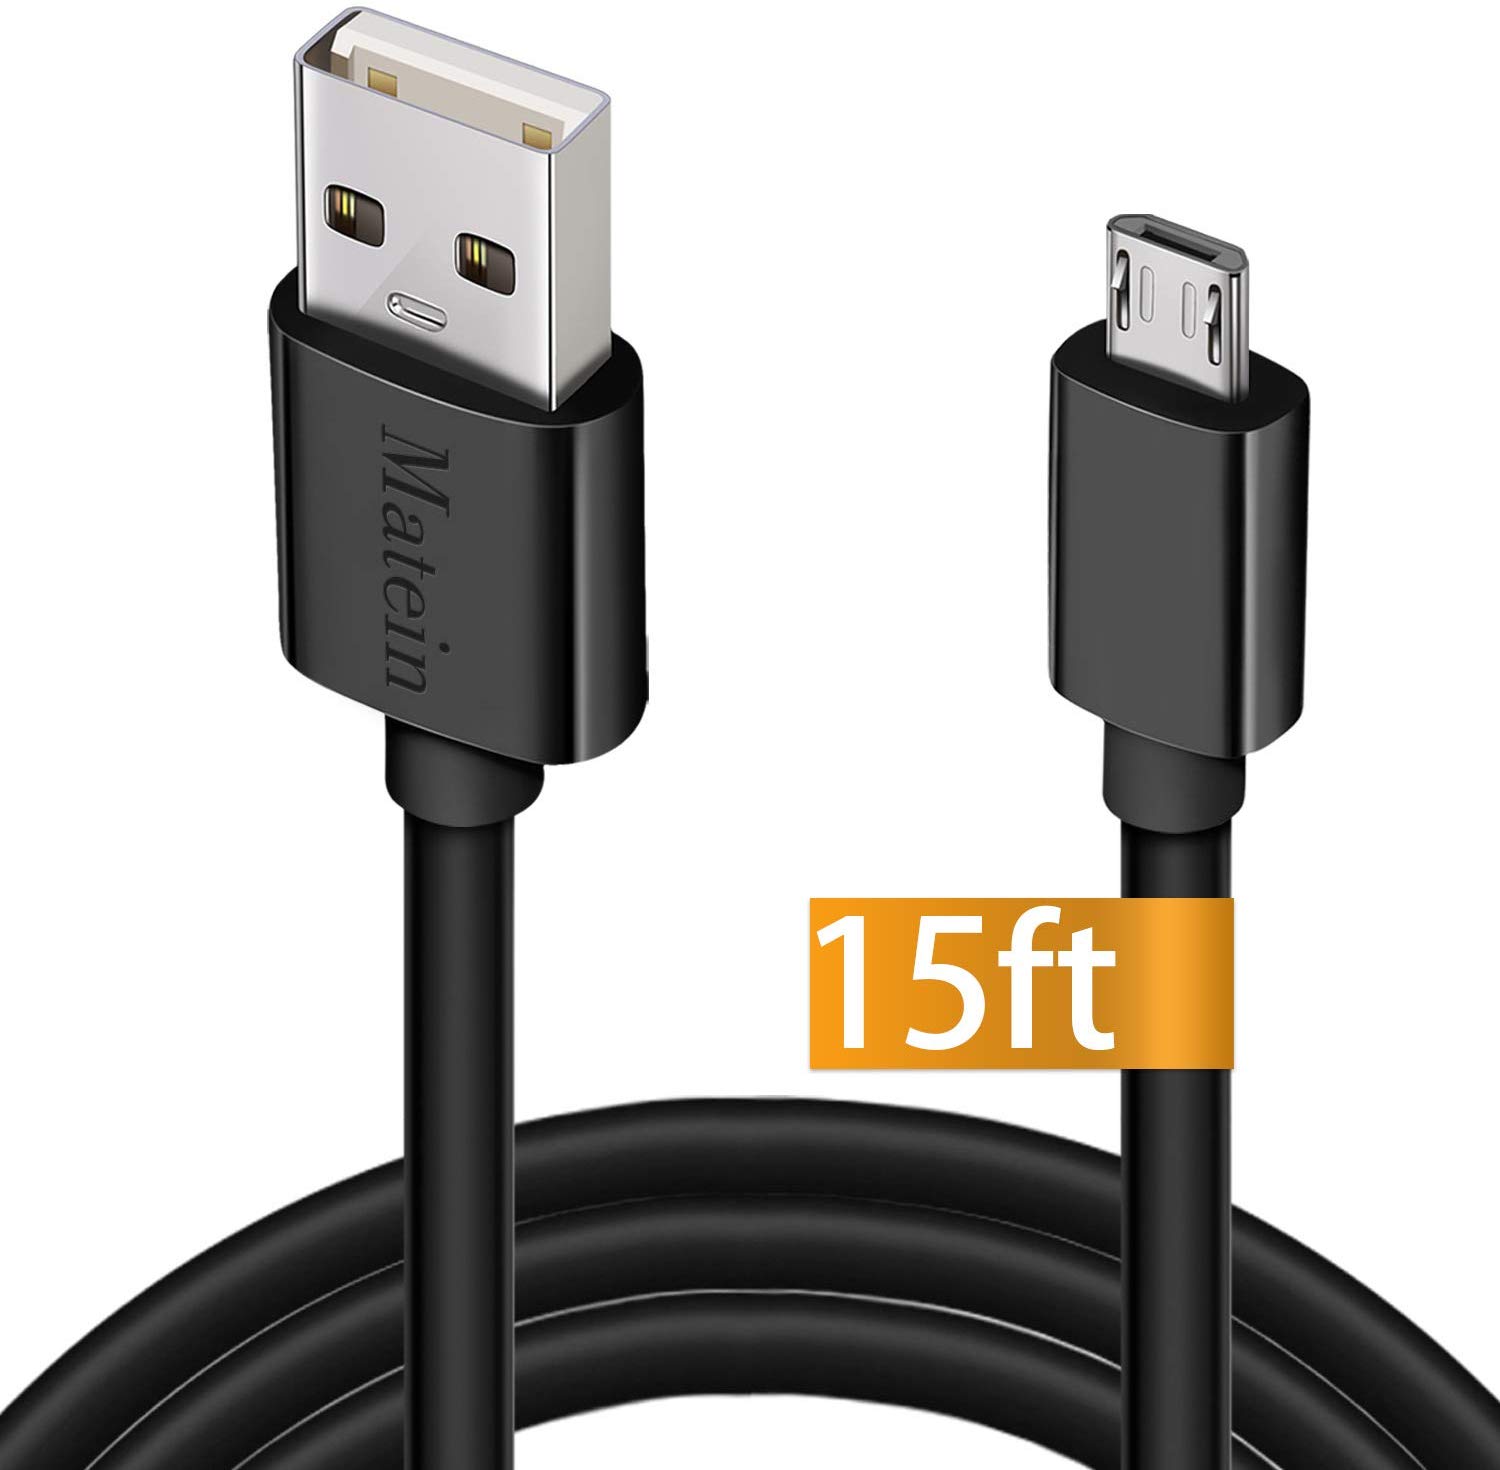 15ft micro USB charging cable